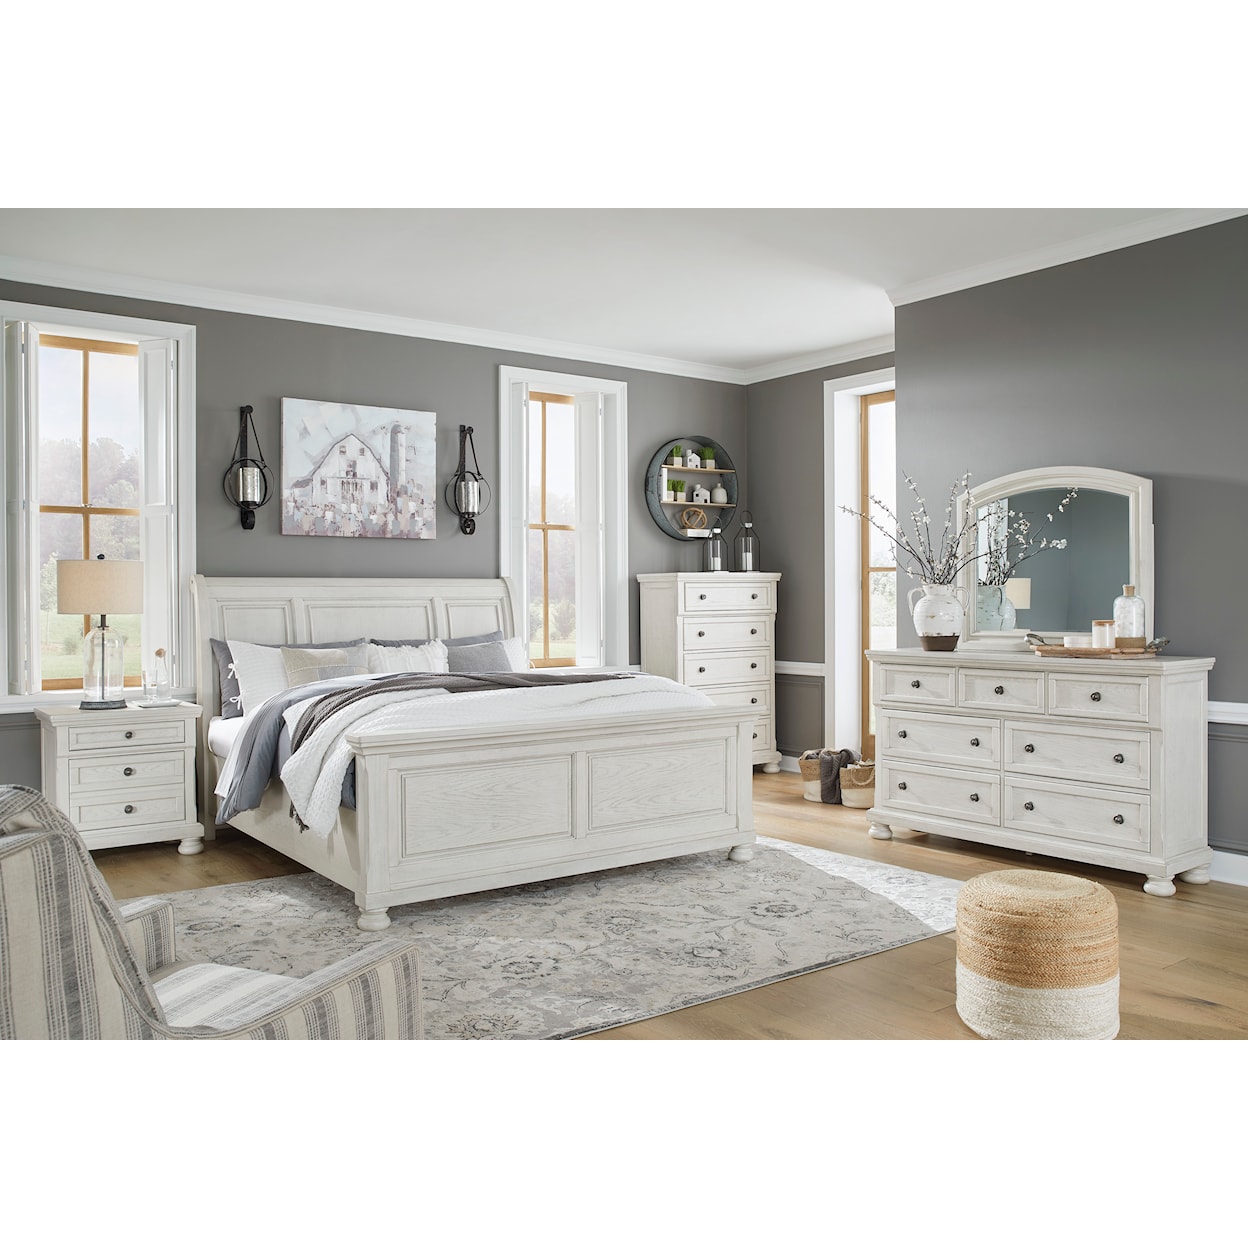 Signature Design by Ashley Robbinsdale California King Bedroom Group